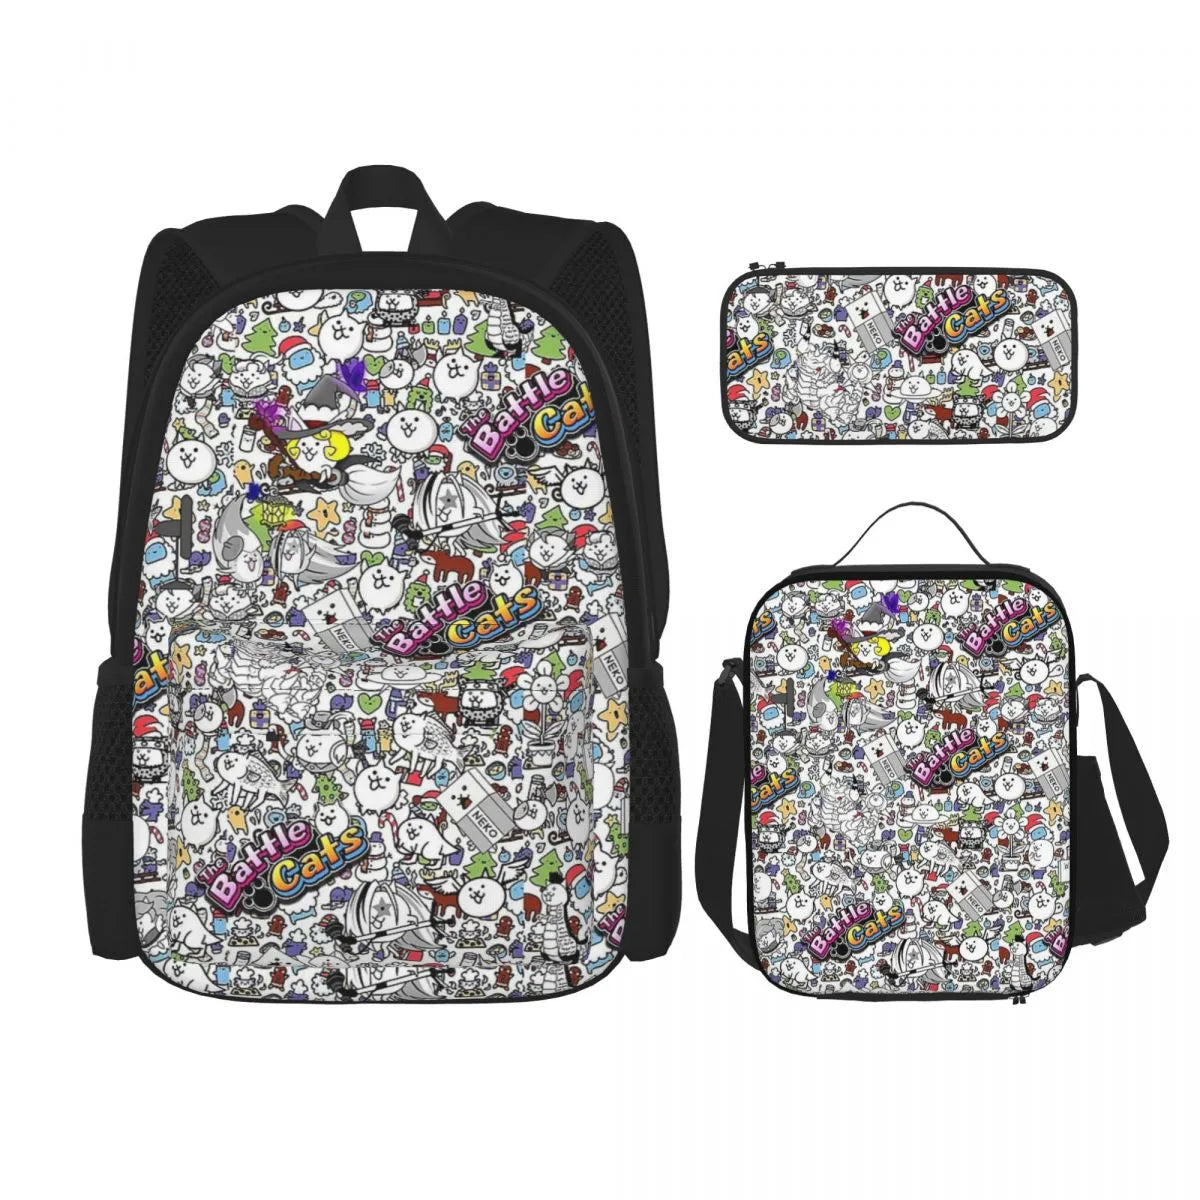 Adventure Awaits with Cat Battle Children's School Bags Pencil case and lunch bag 3 in 1 - Let the Fun Begin! - Nekoby Adventure Awaits with Cat Battle Children's School Bags Pencil case and lunch bag 3 in 1 - Let the Fun Begin! Default Title